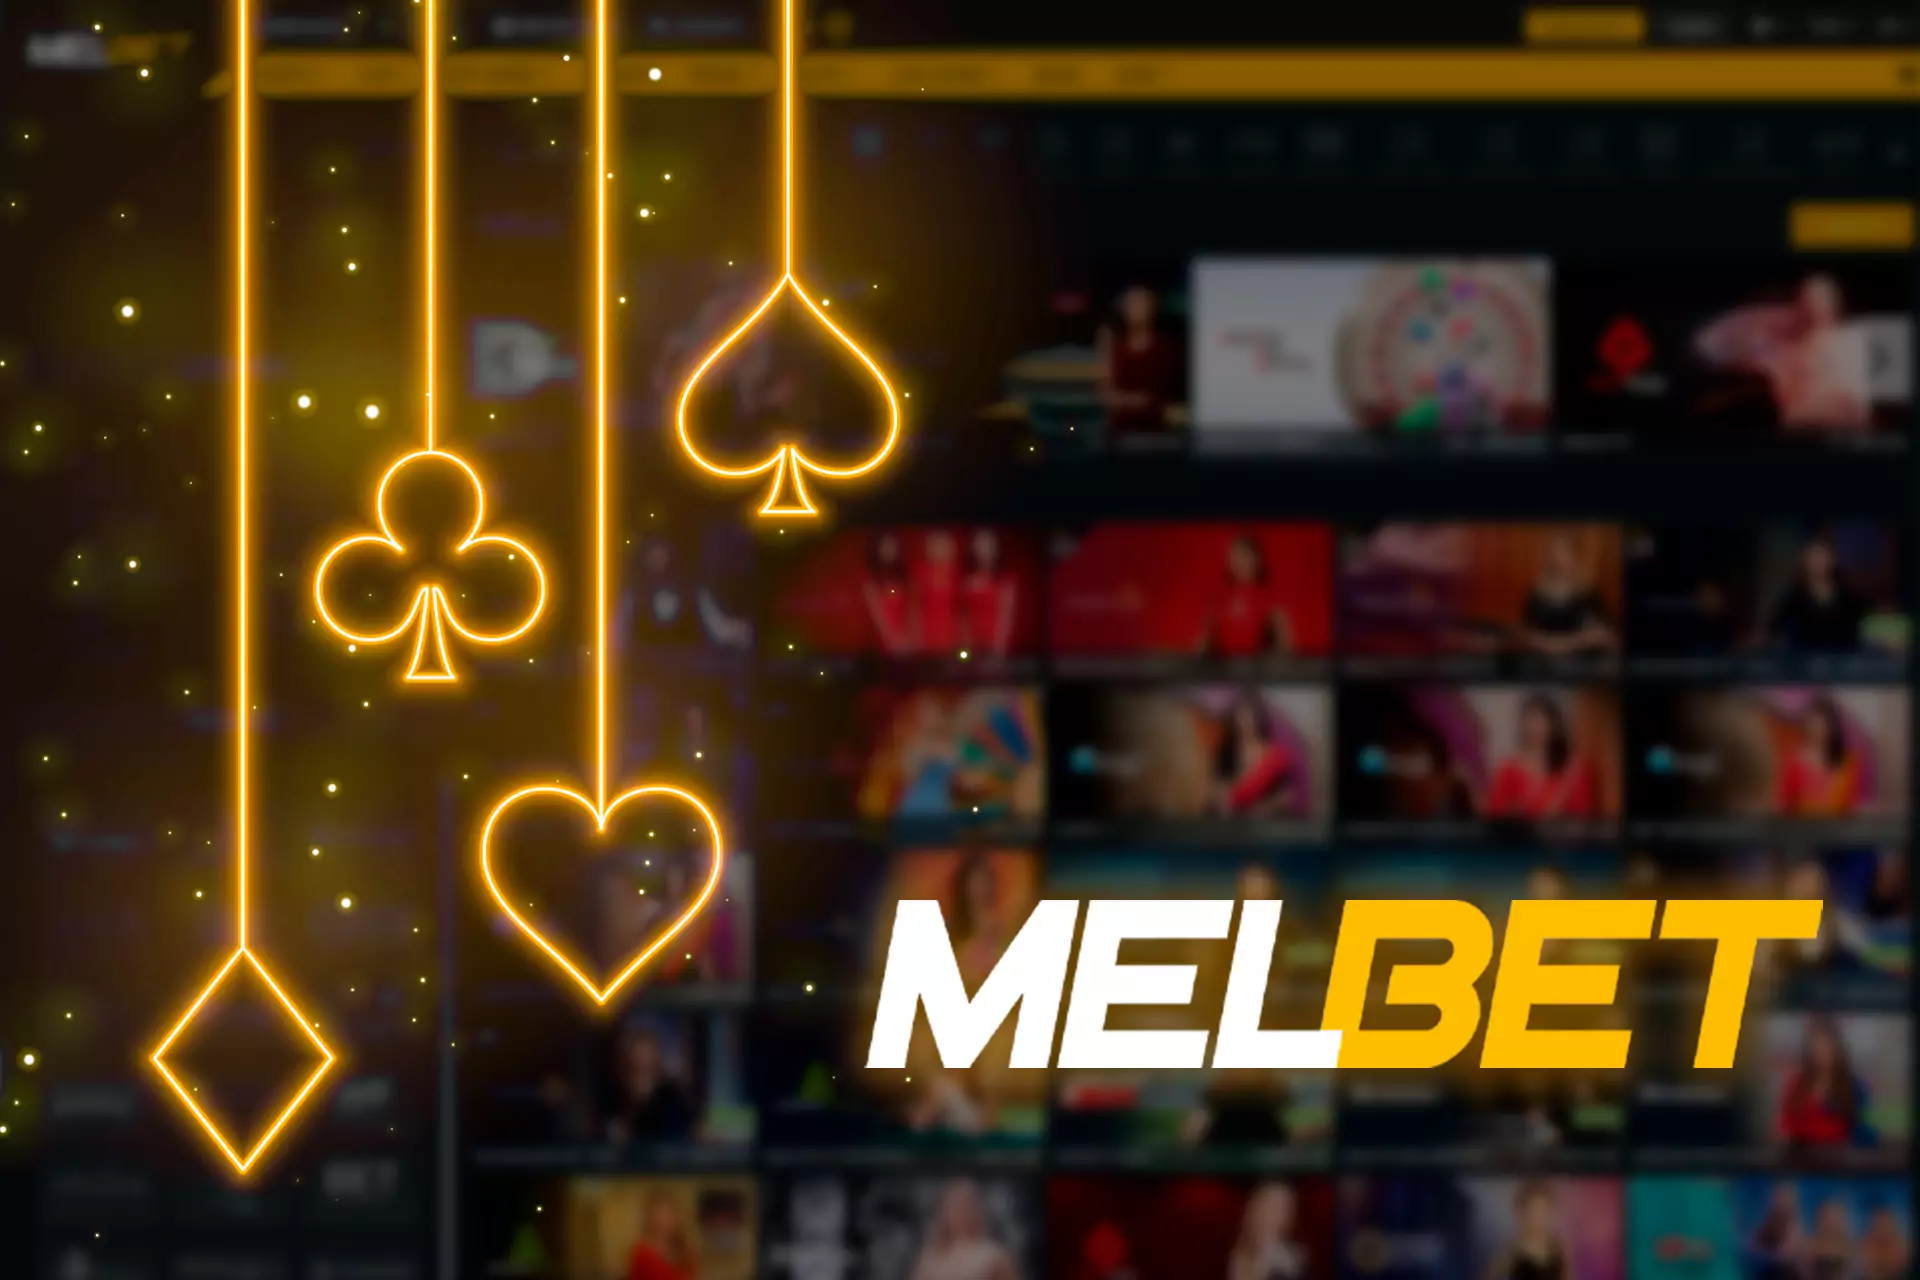 In the Melbet Casino, you can try playing slots, roulette, poker, bingo, blackjack, and many other games.